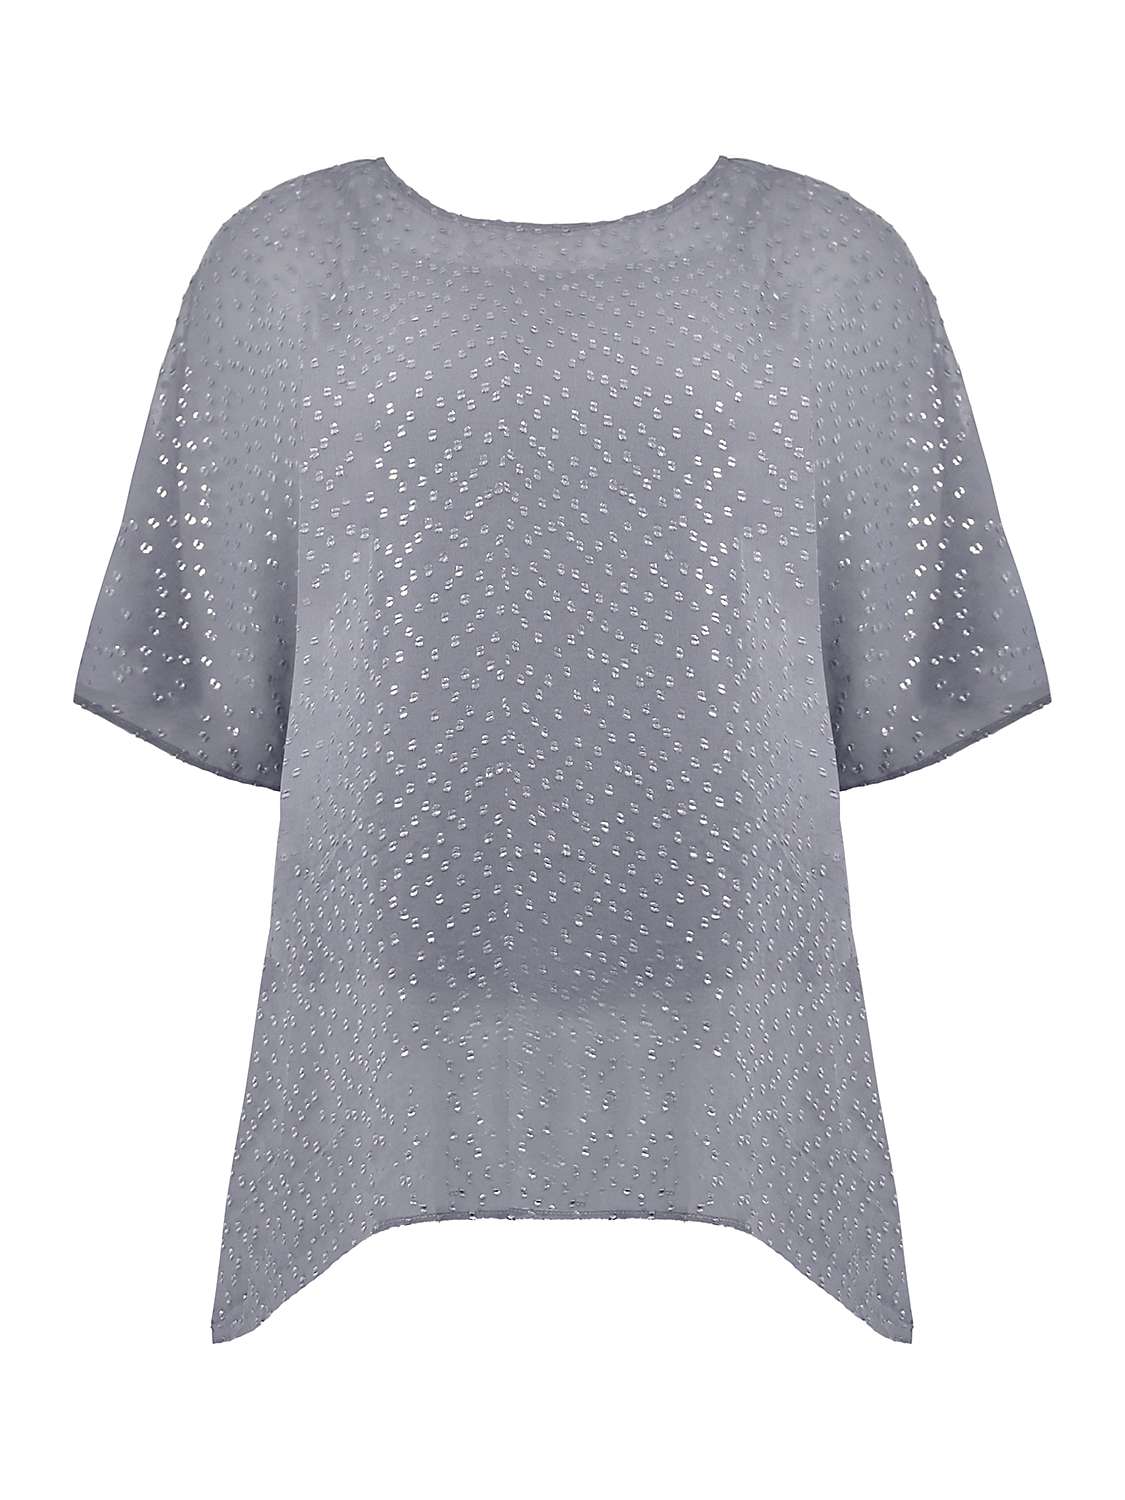 Buy Live Unlimited Curve Metallic Dobby Overlay Top Online at johnlewis.com